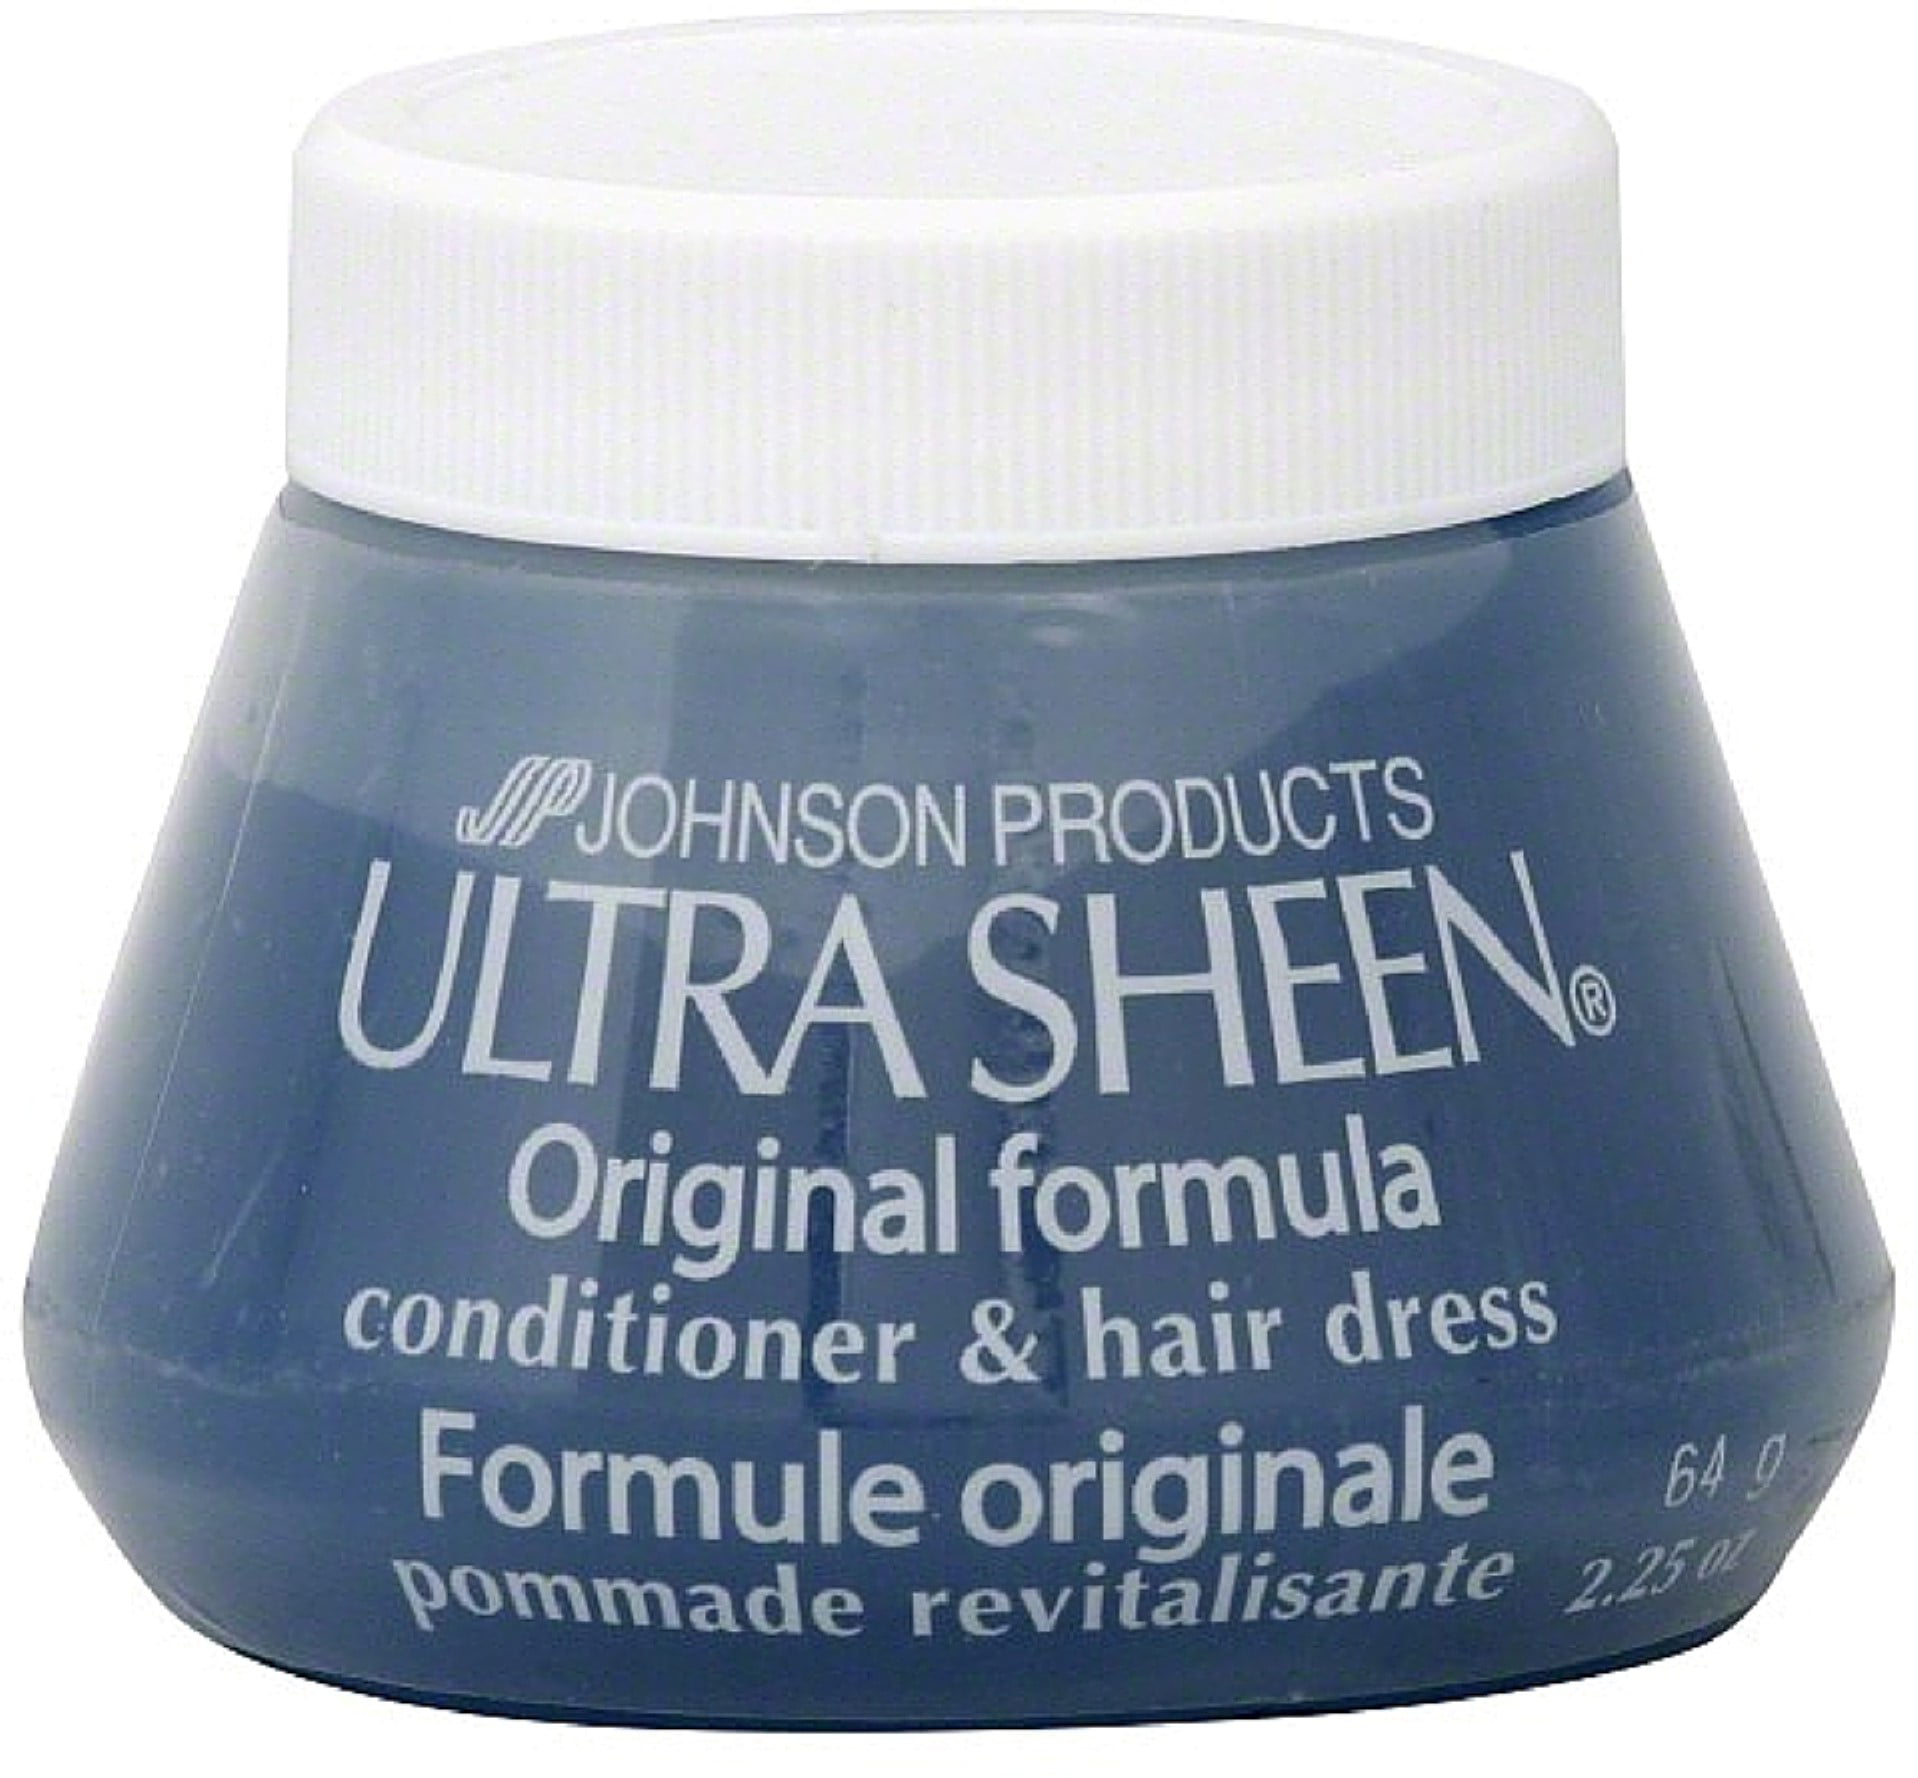 Sheen hair products. Made in Australia FX the Original Formula.